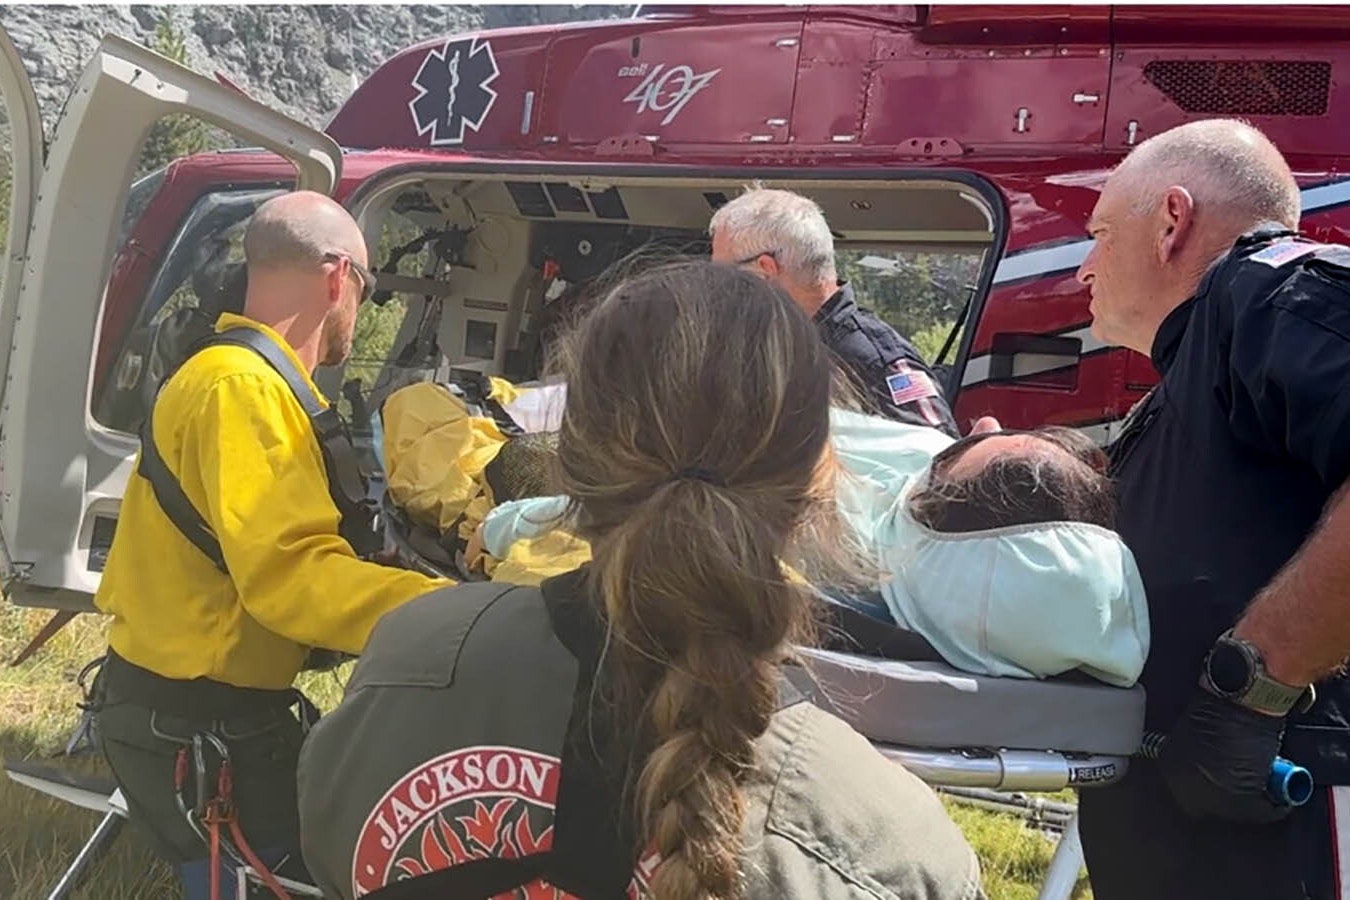 Era Aranow, a member of the Fremont County Search and Rescue Lander Unit, is helped by her fellow responders after being hurt on a mission.